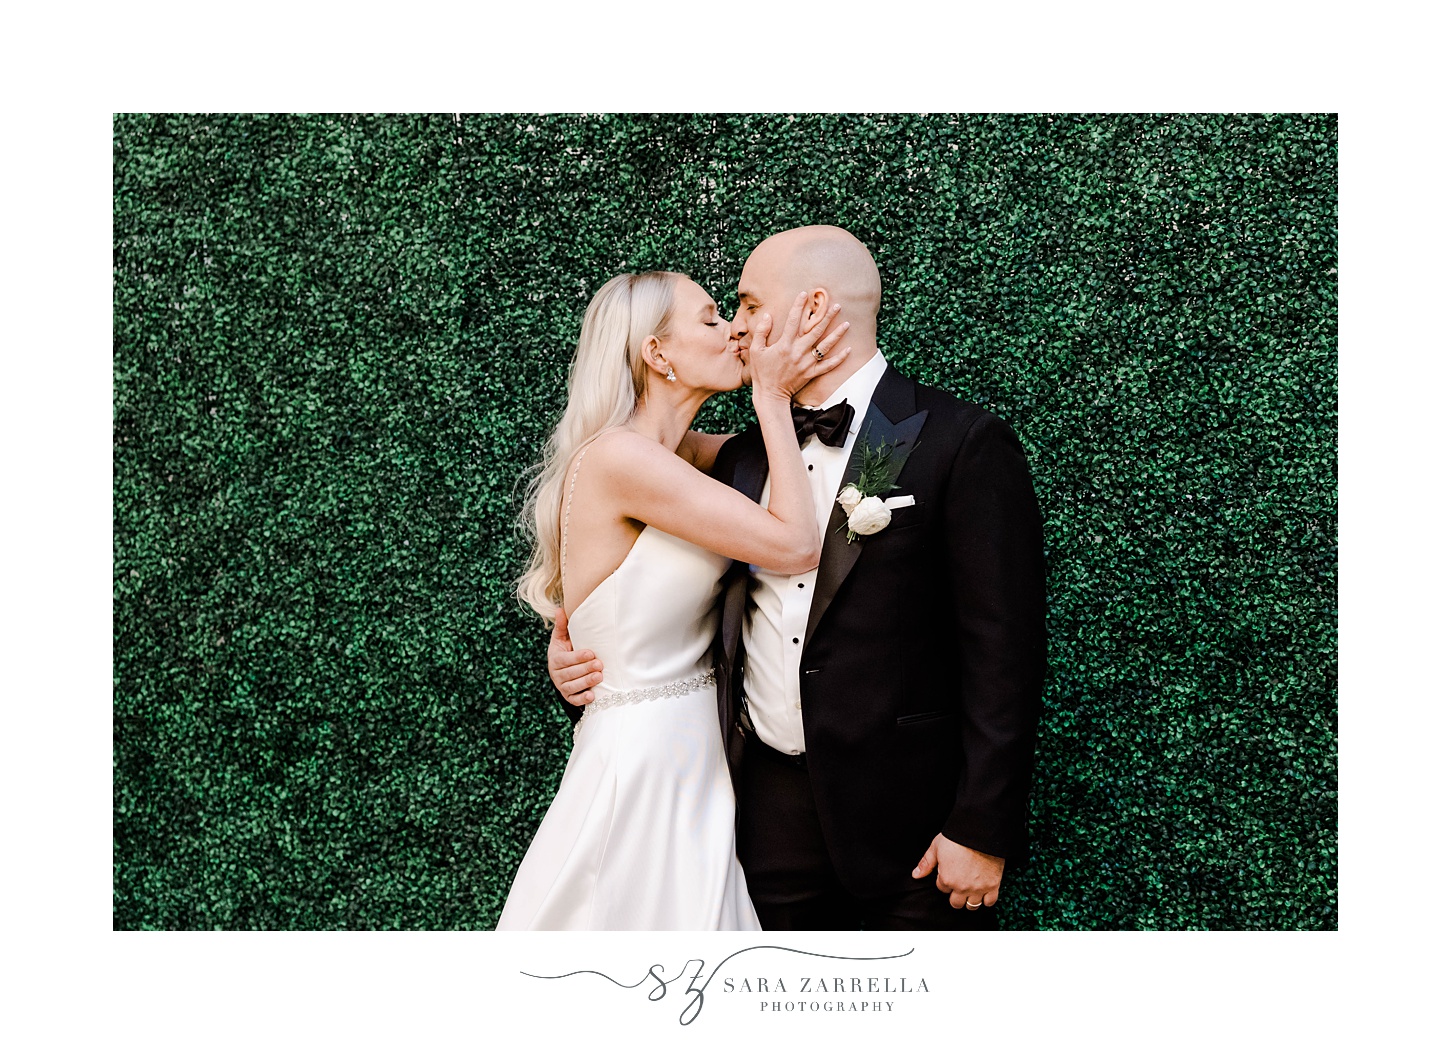 newlyweds kiss by greenery wall of photo booth